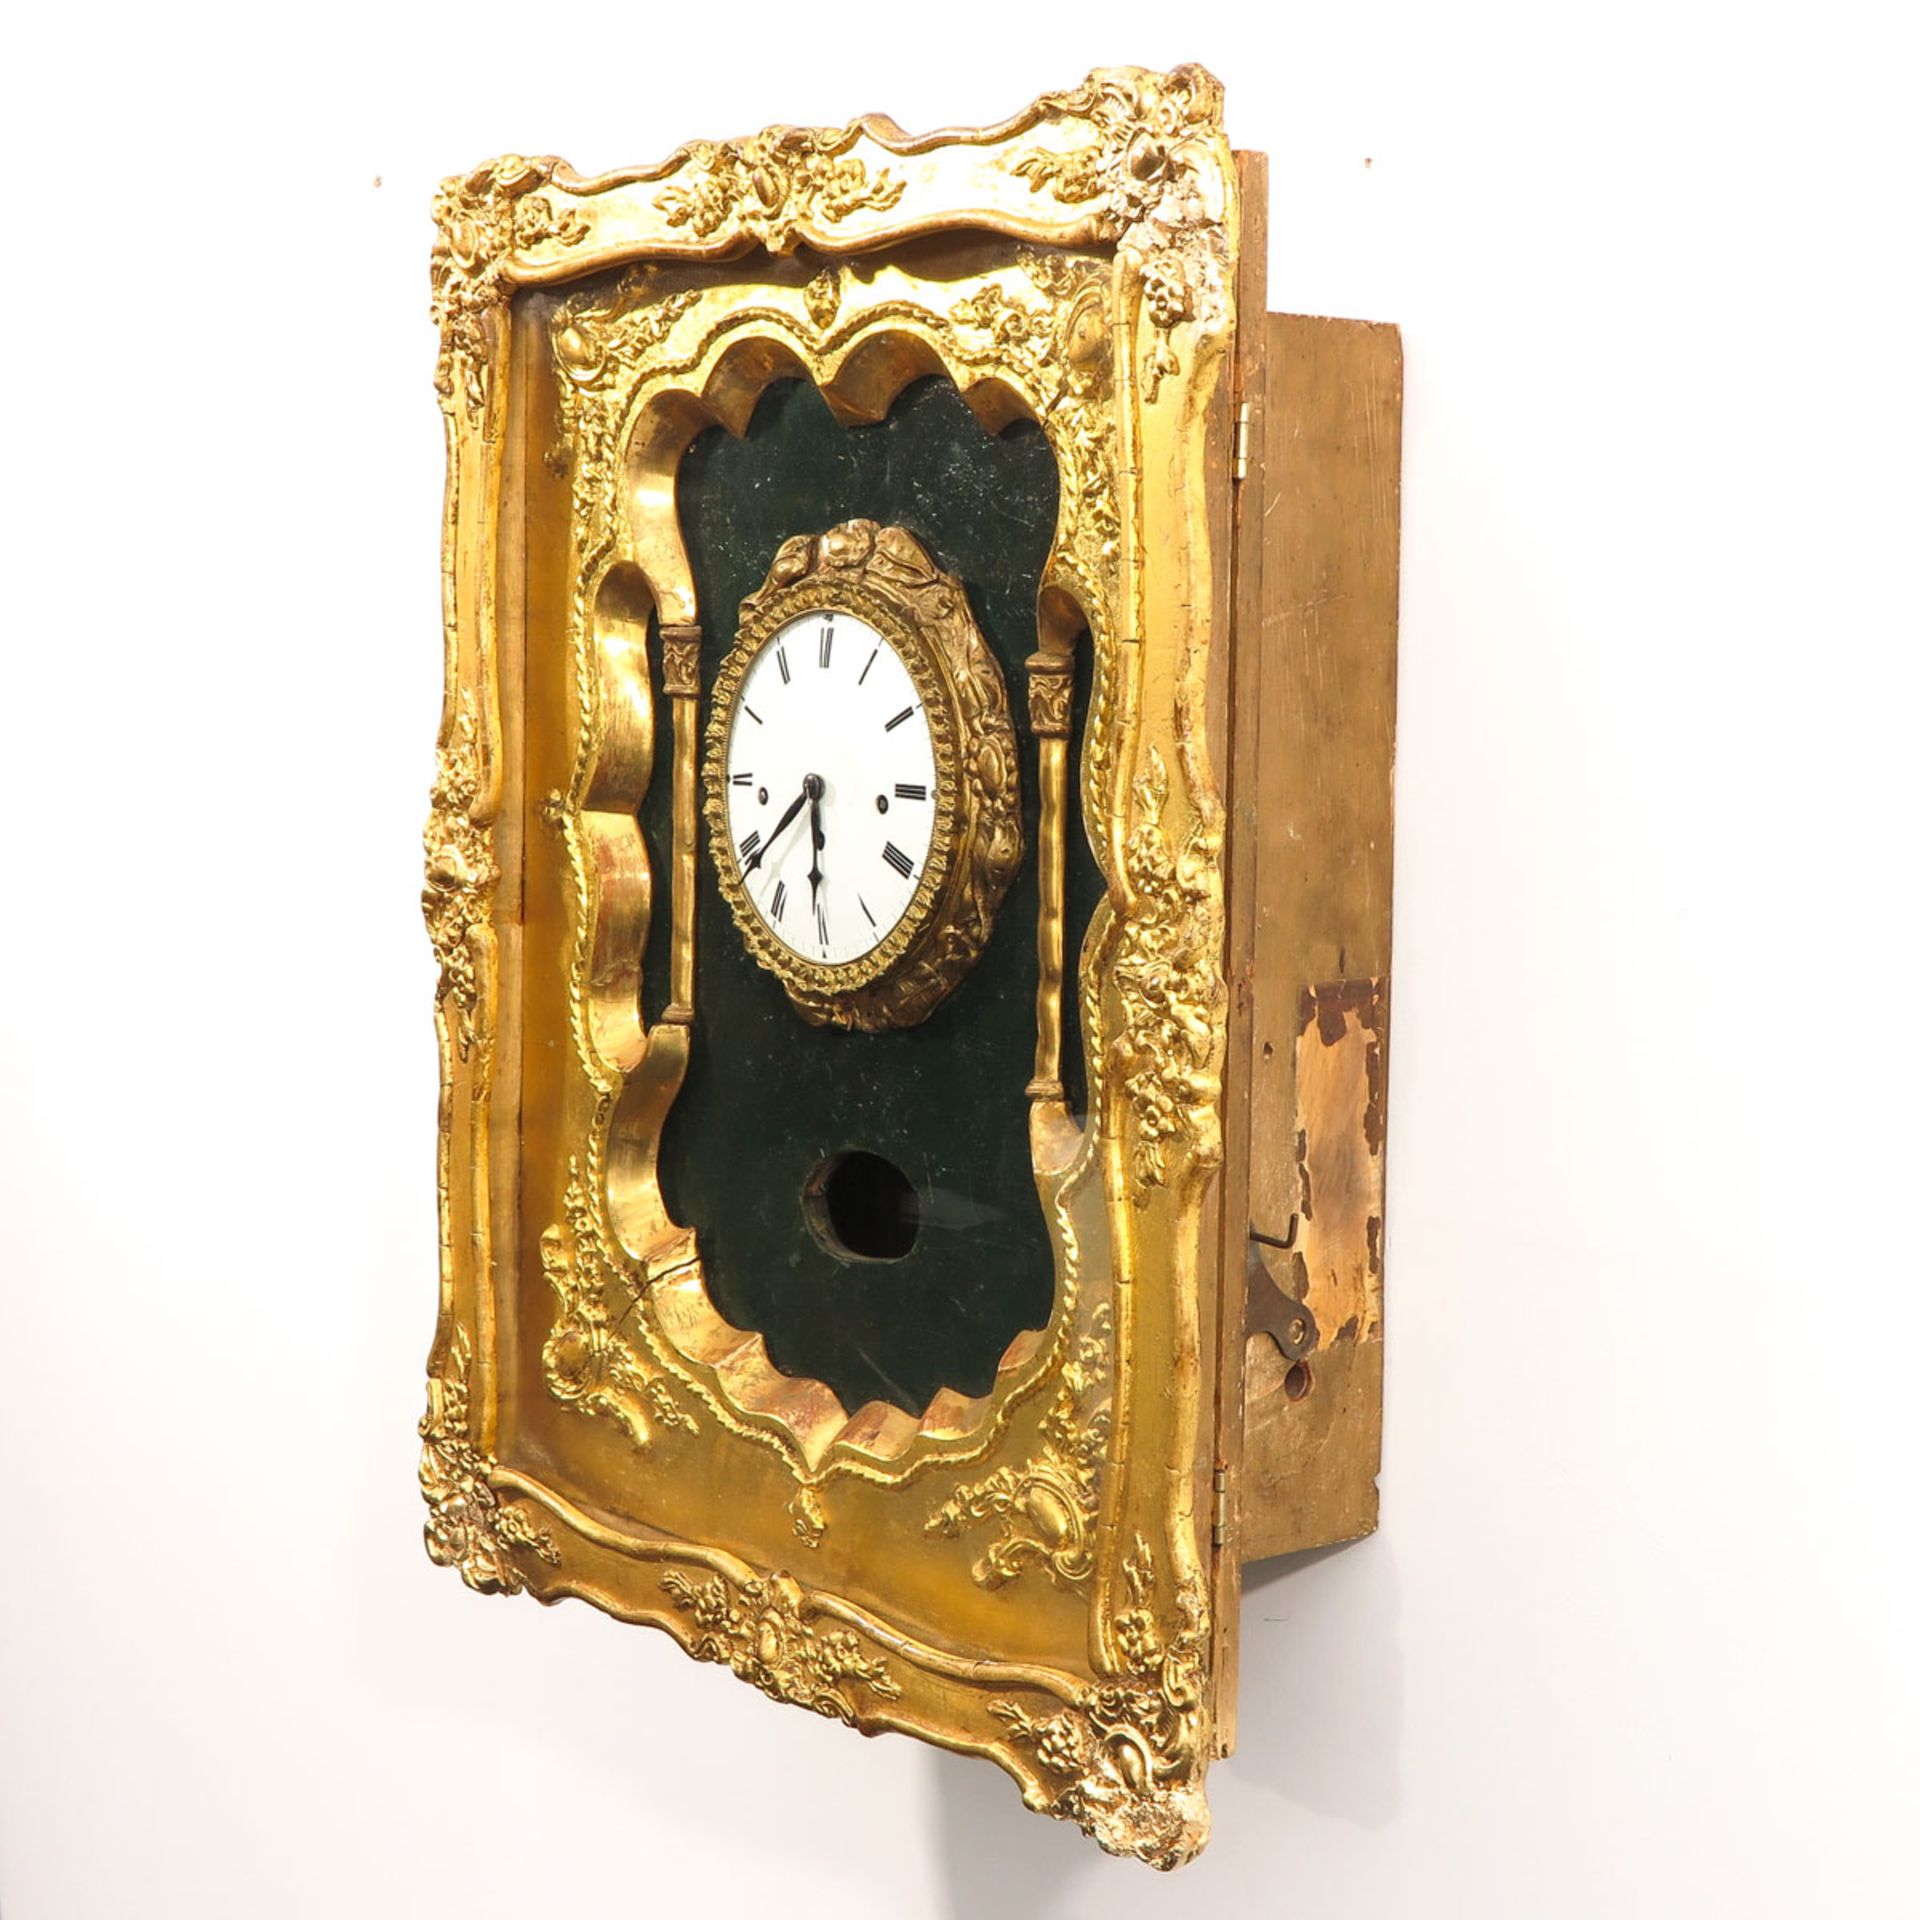 A 19th Century Viennese Musical Wall Clock - Image 4 of 10